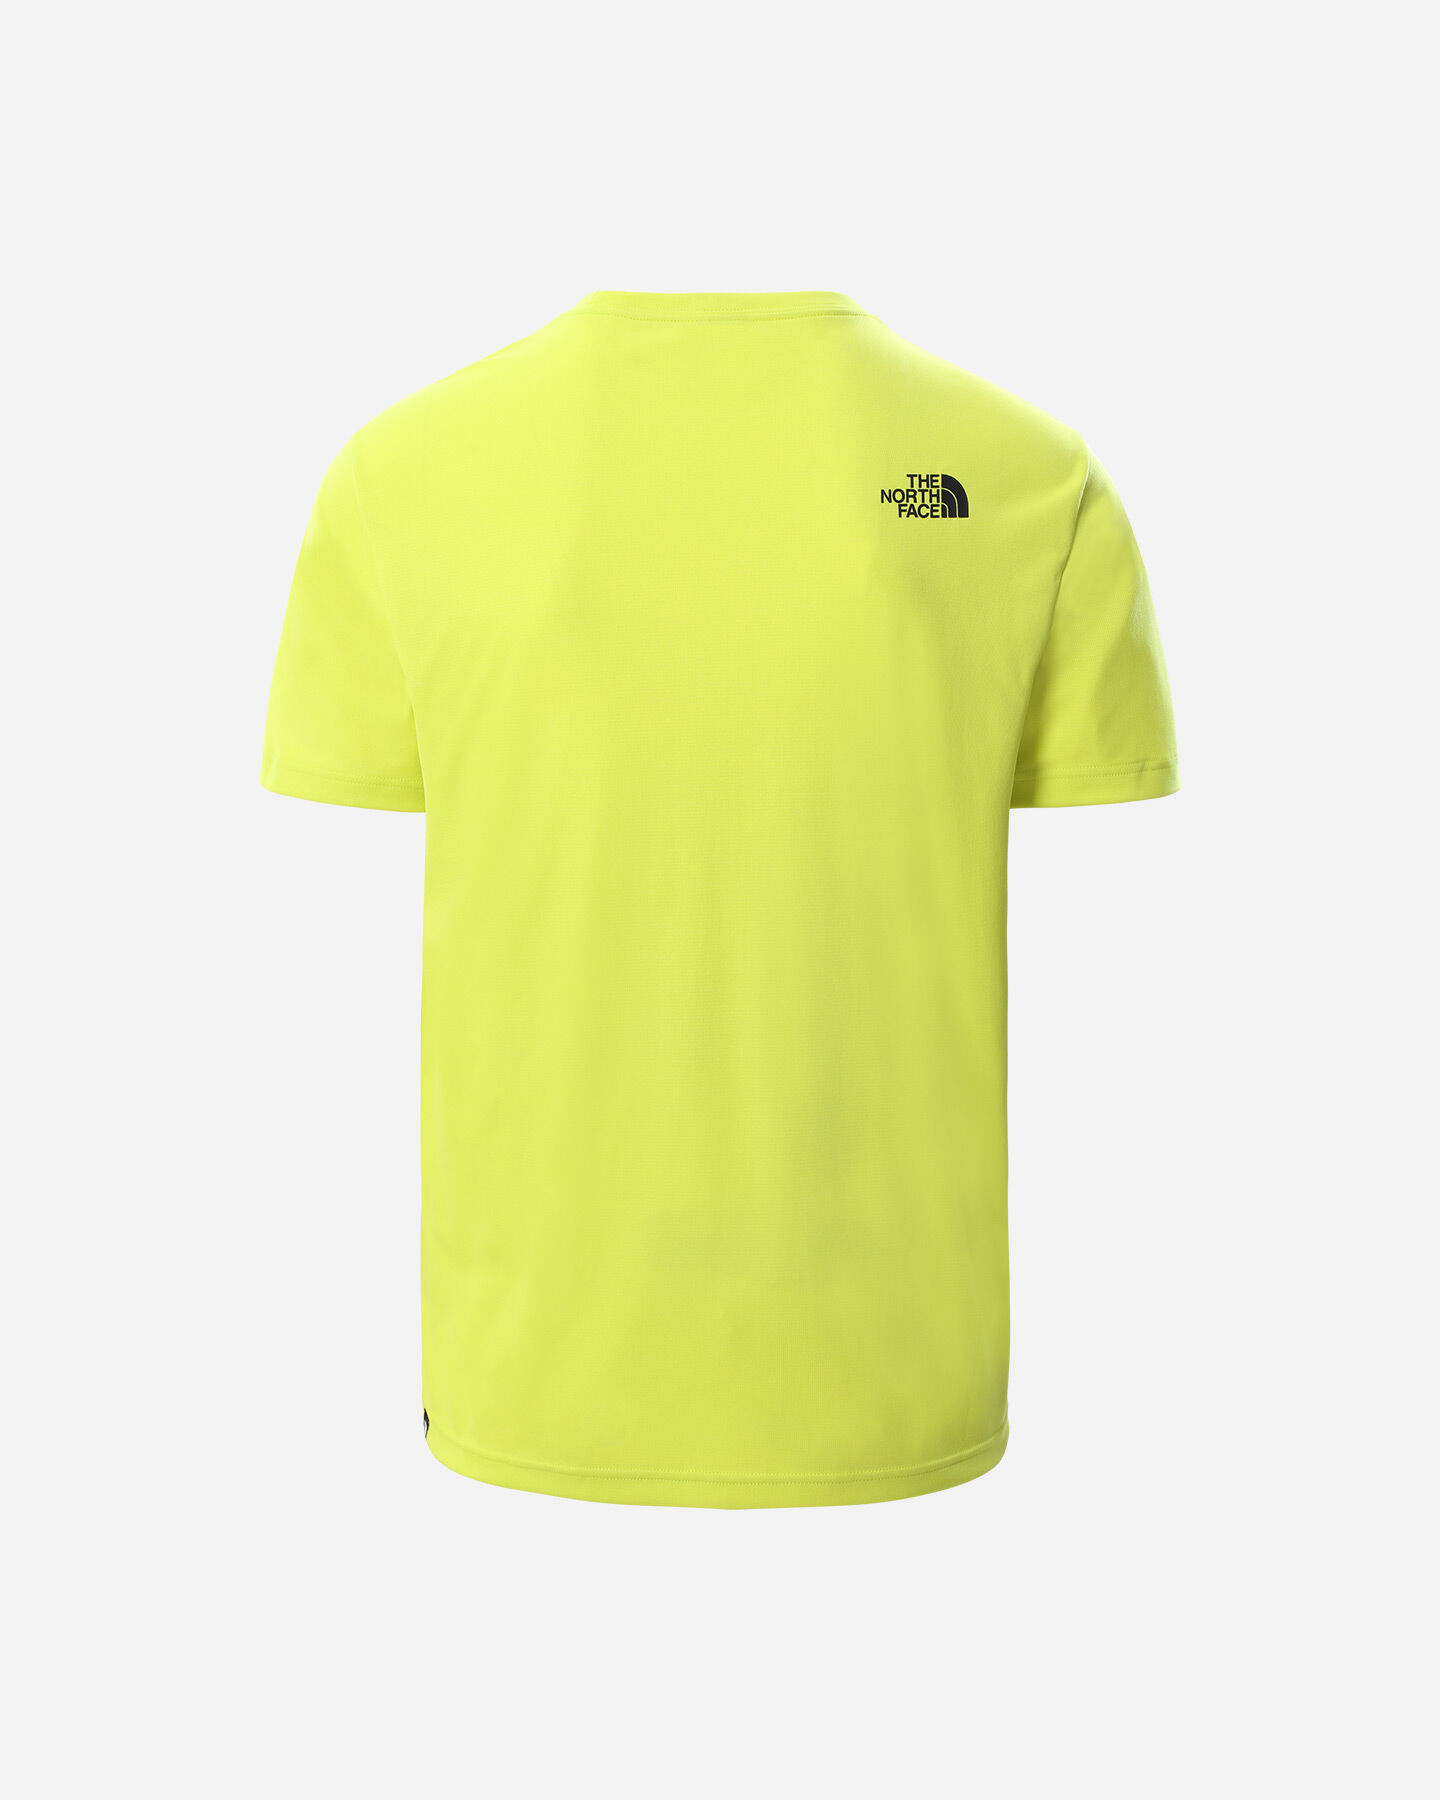  T-Shirt THE NORTH FACE EXTENT III M S5296477 scatto 1